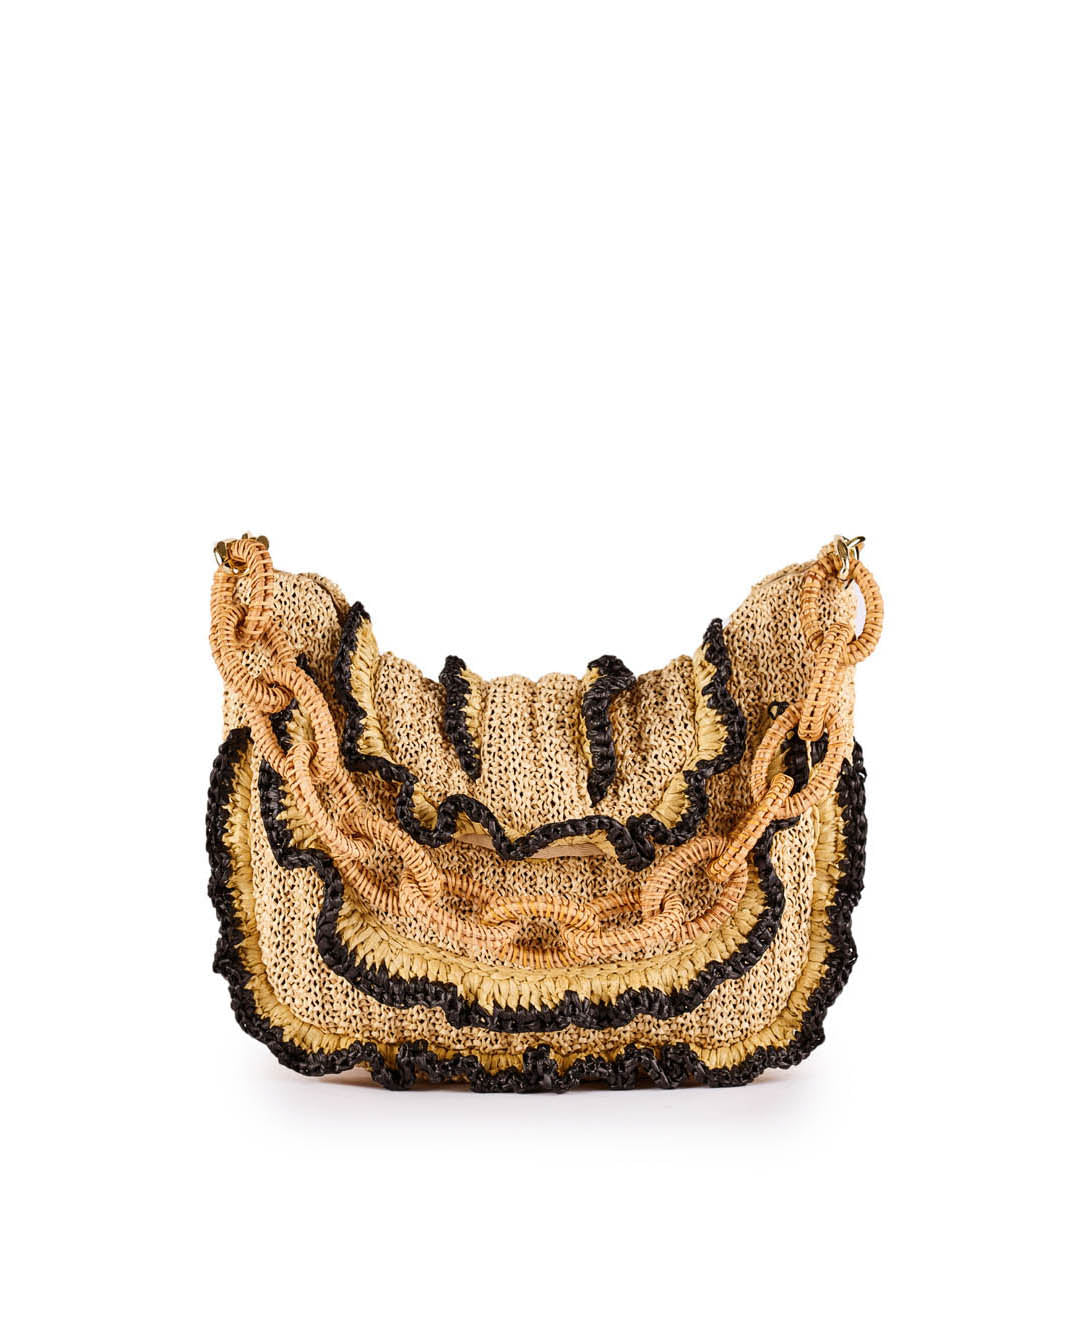 Woven straw handbag with ruffled edges and braided handle